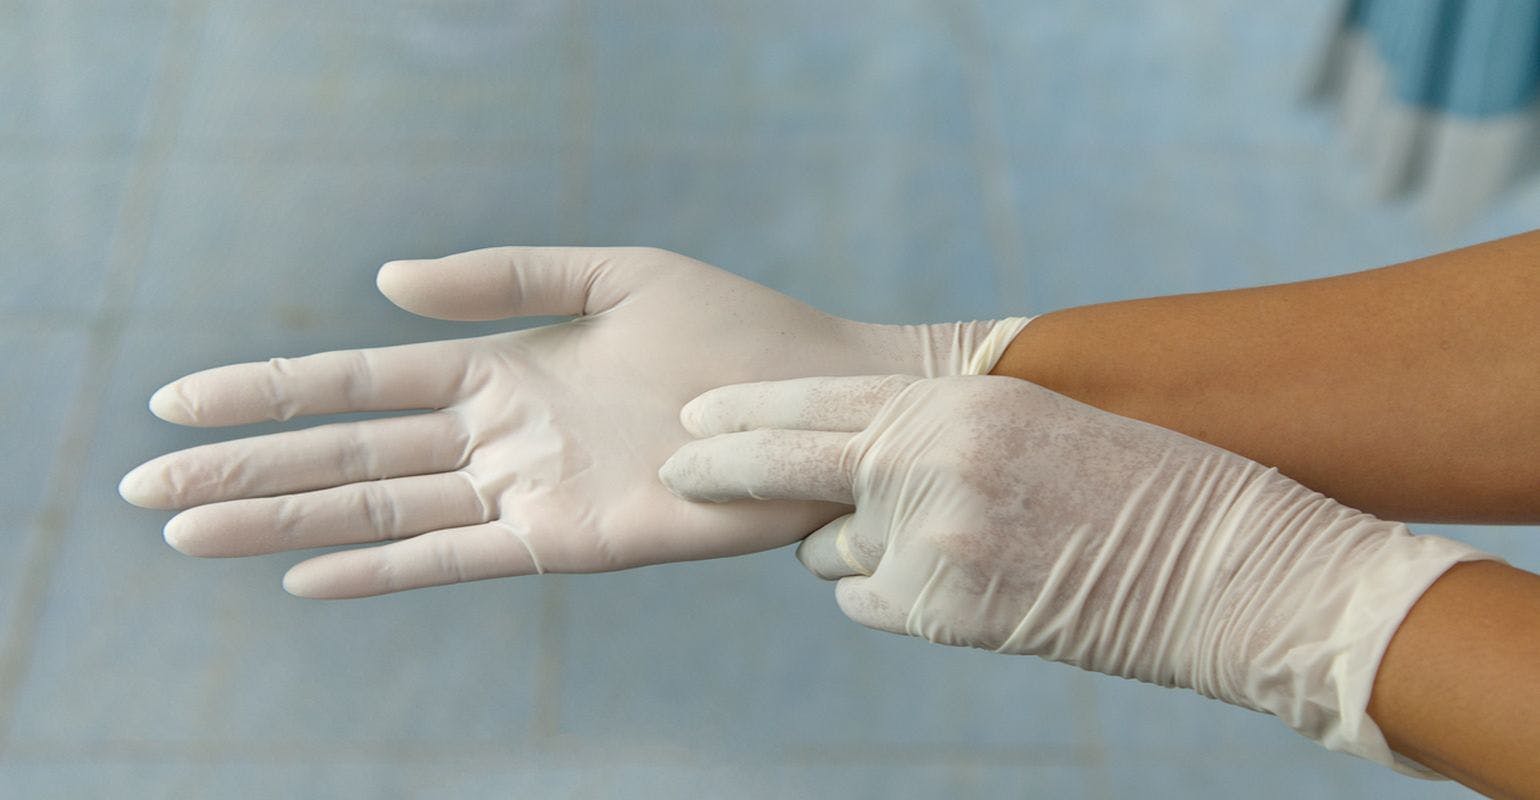 Improper Removal of Personal Protective Equipment Contaminates Healthcare Workers 